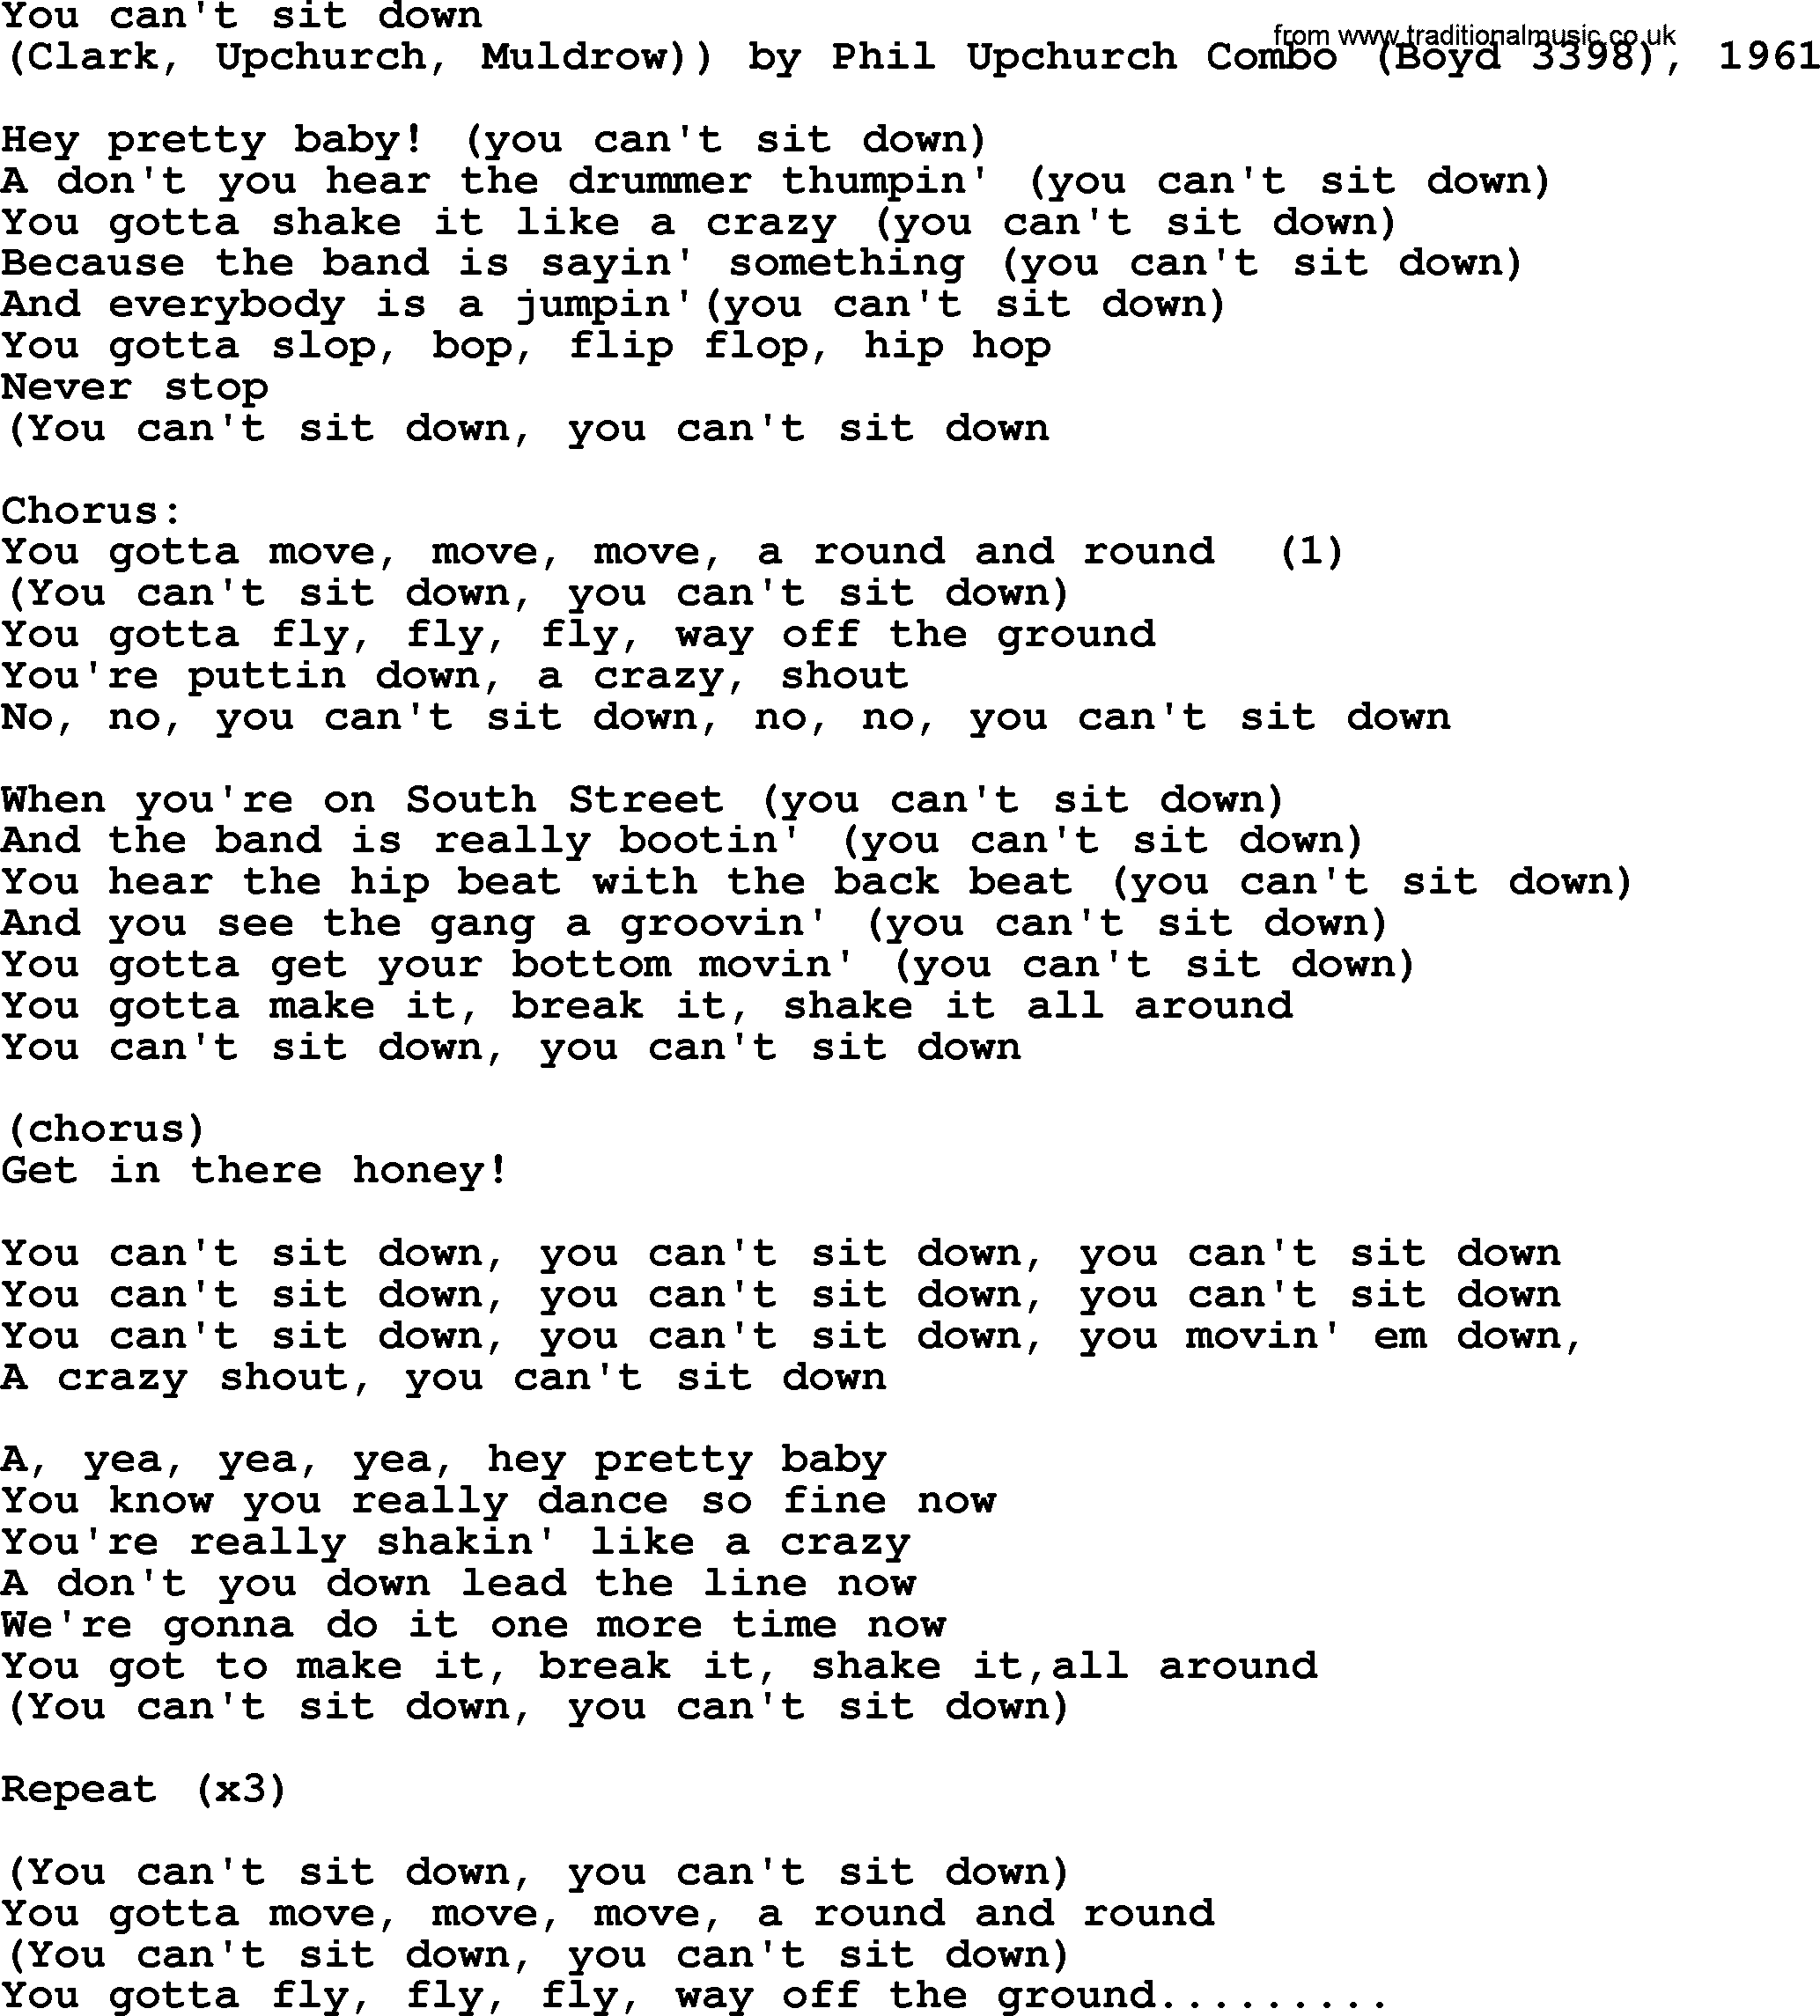 Bruce Springsteen song: You Can't Sit Down lyrics